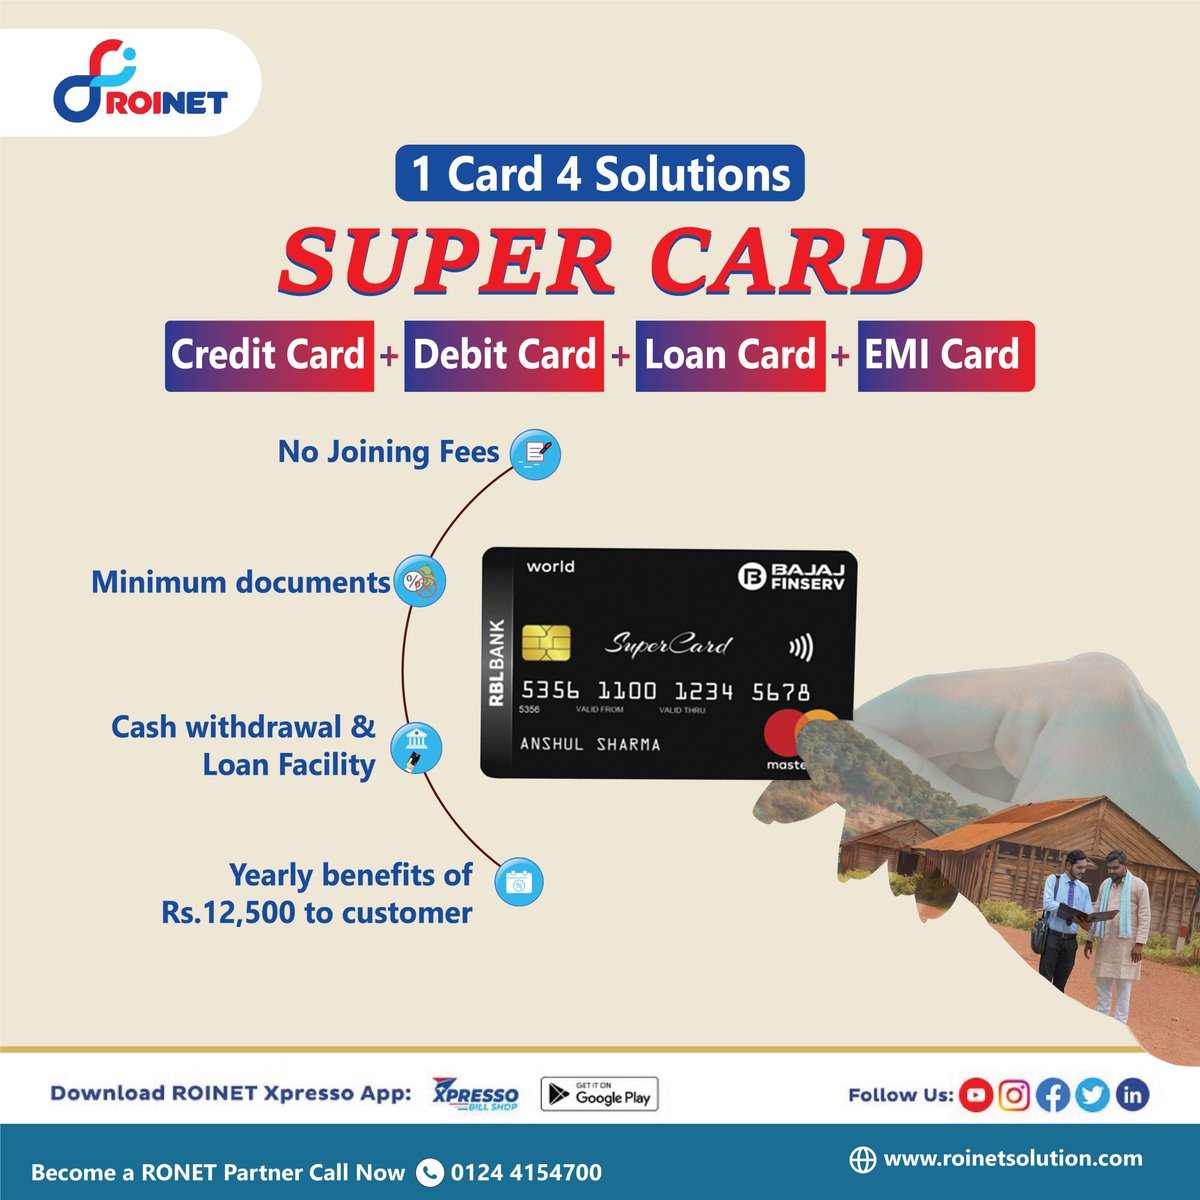 ROINET introduces Bajaj Finserv Super Card, the ultimate companion. You will get facilities of Credit Cards, Debit Cards, Loan Cards, & EMI Cards in one card. Contact +91-124-4154700 or contact@roinet.in 
#ROINet #roinetsolution #digitalbanking #ruralbanking #RBLcard #digitalcard